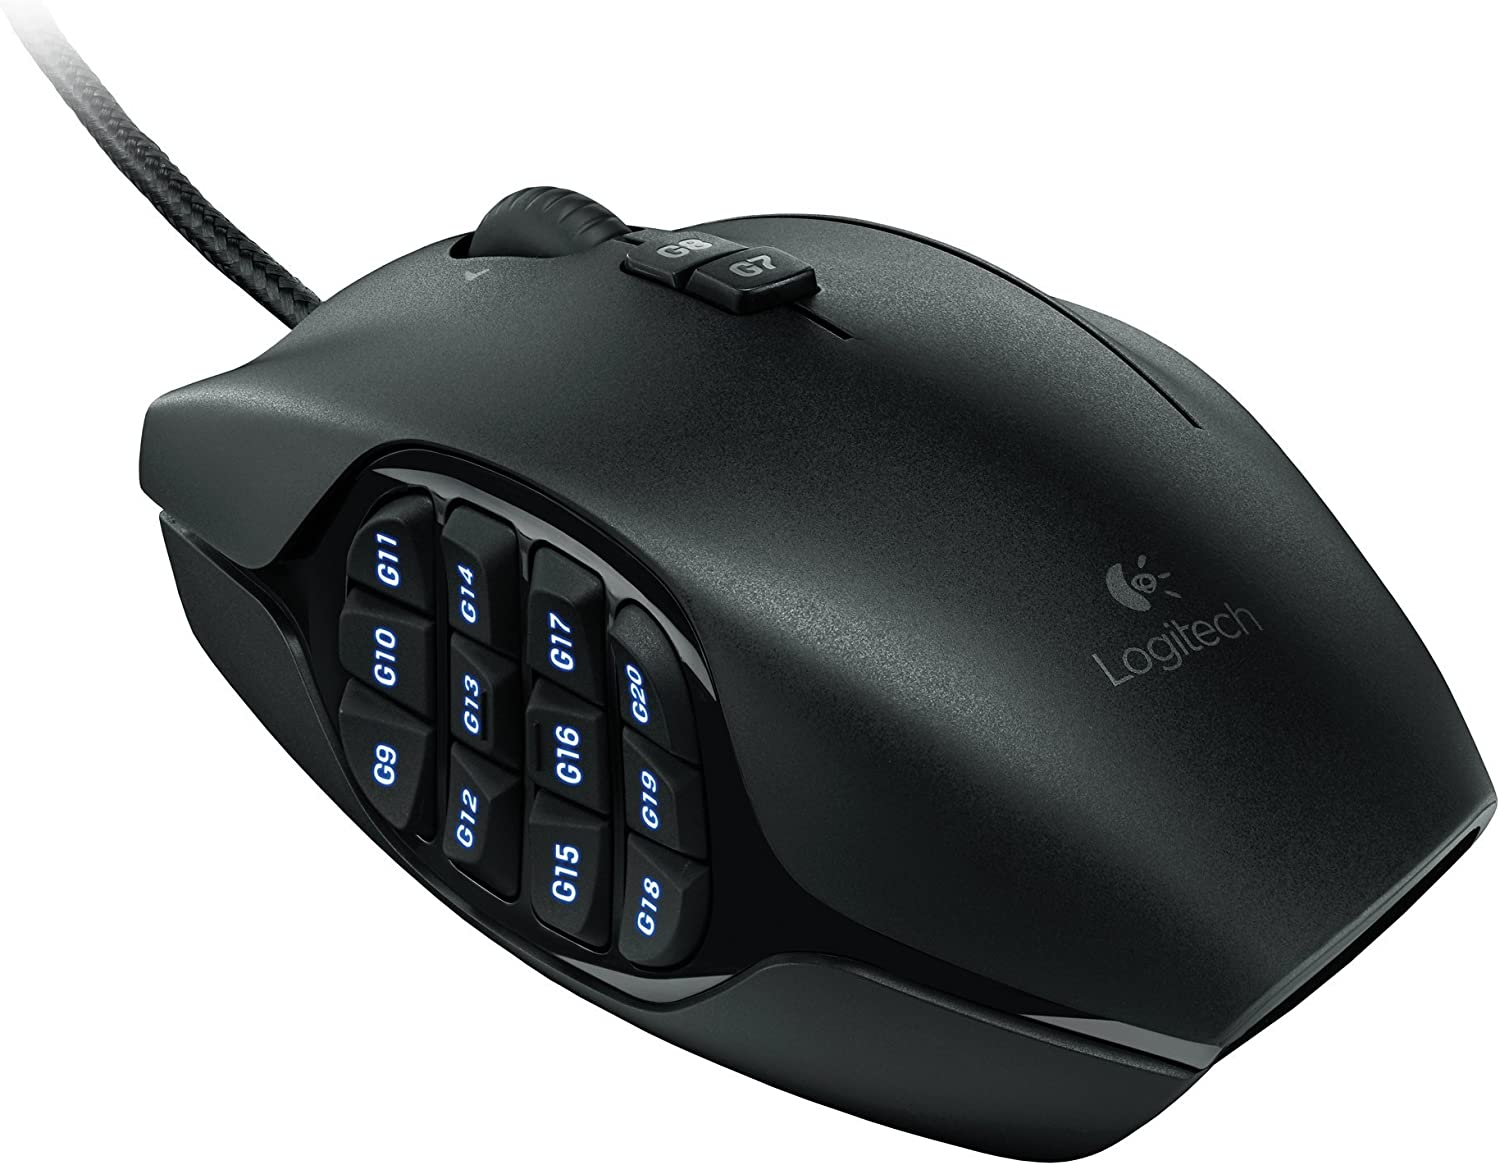 A gaming mouse with more buttons would be a better investment as you will have the extra buttons for other game genres that you may want to try in the future.